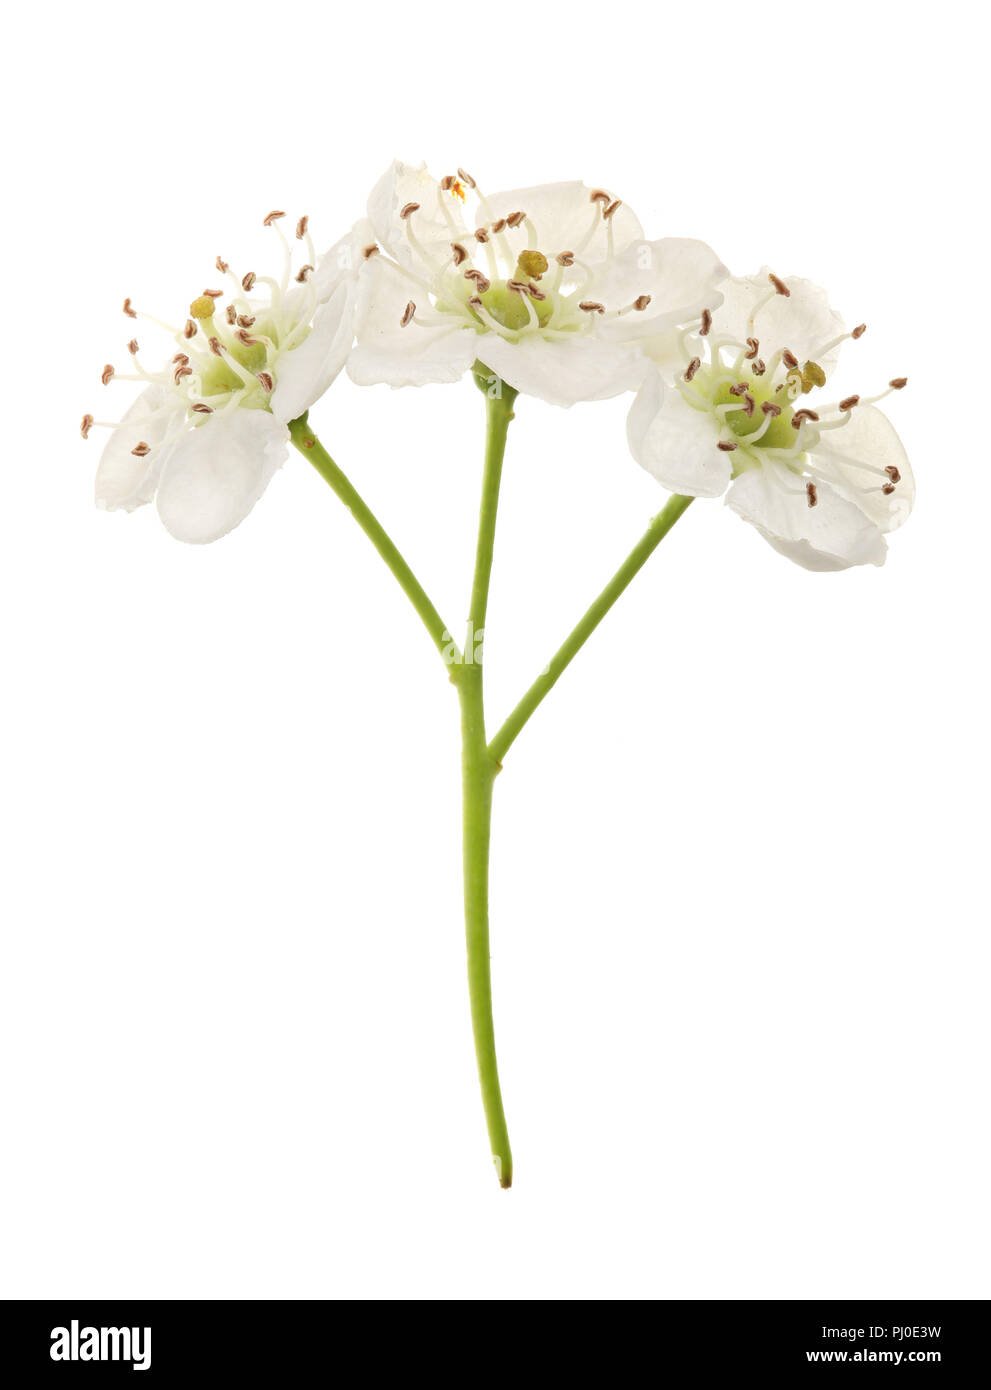 Hawthorn or Crataegus monogyna branch with flowers isolated on a white background Stock Photo